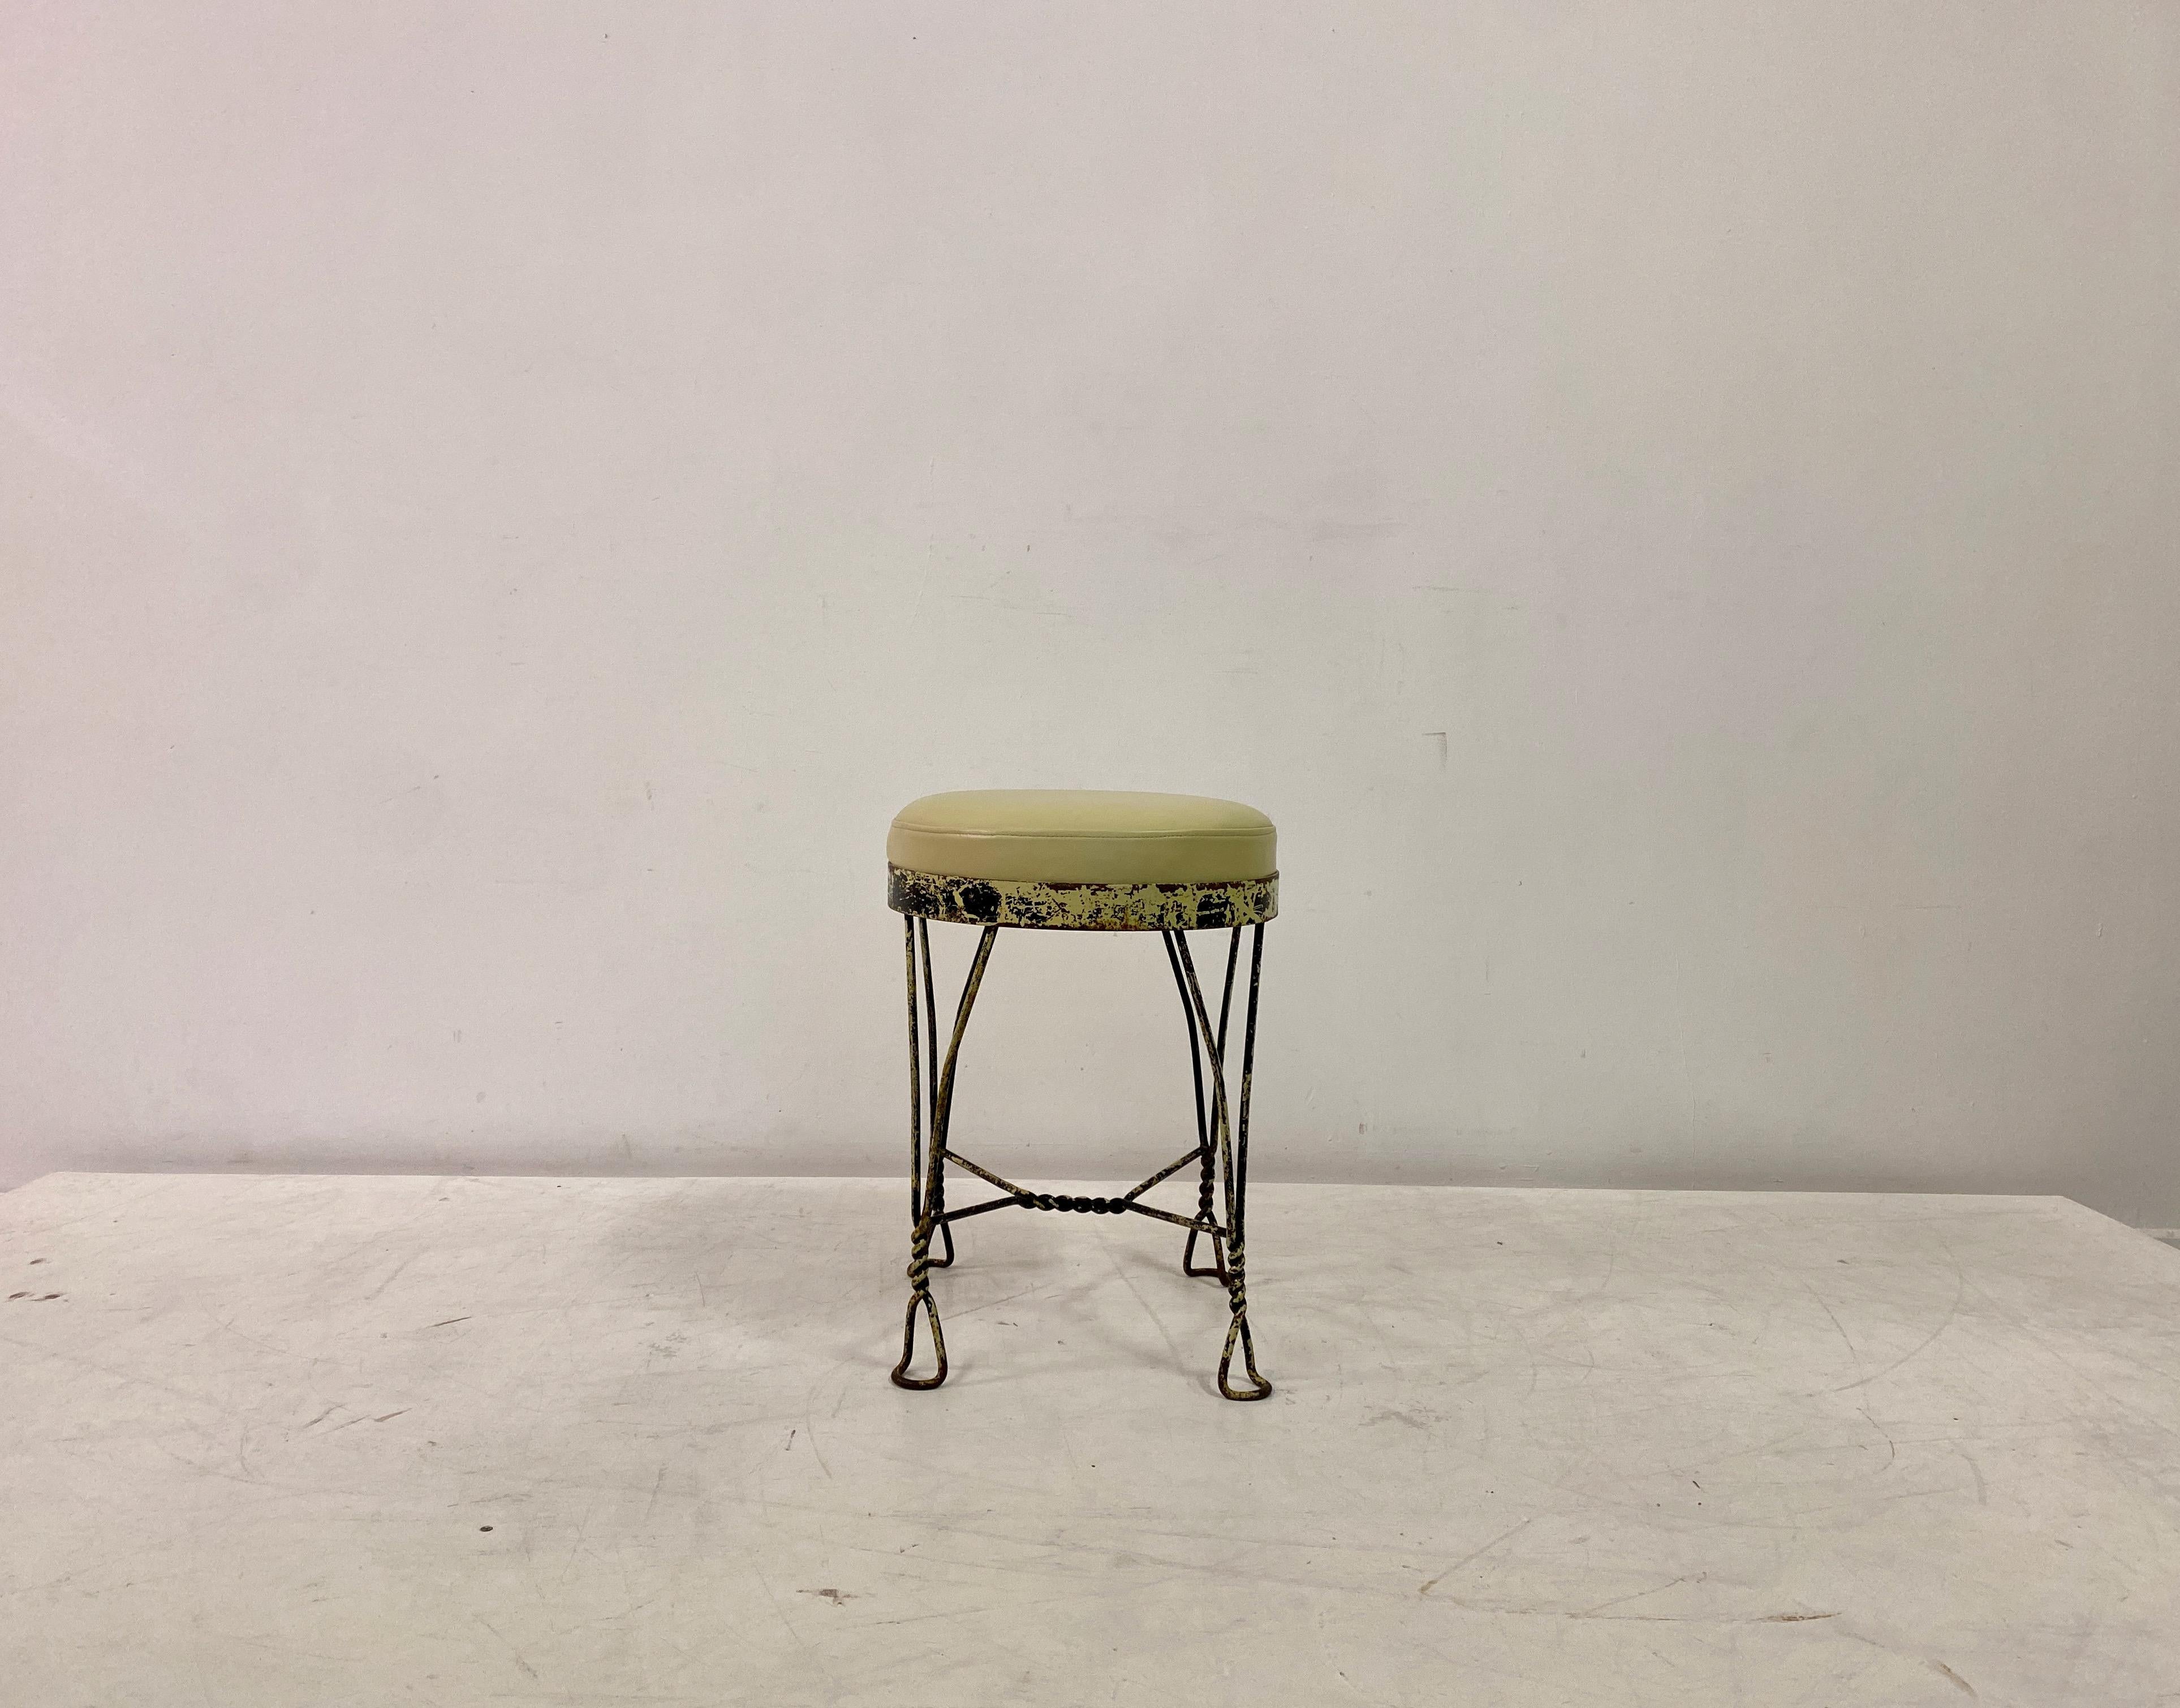 Dressing table stool

Wrought iron

New leather upholstery

Mid to late 20th Century